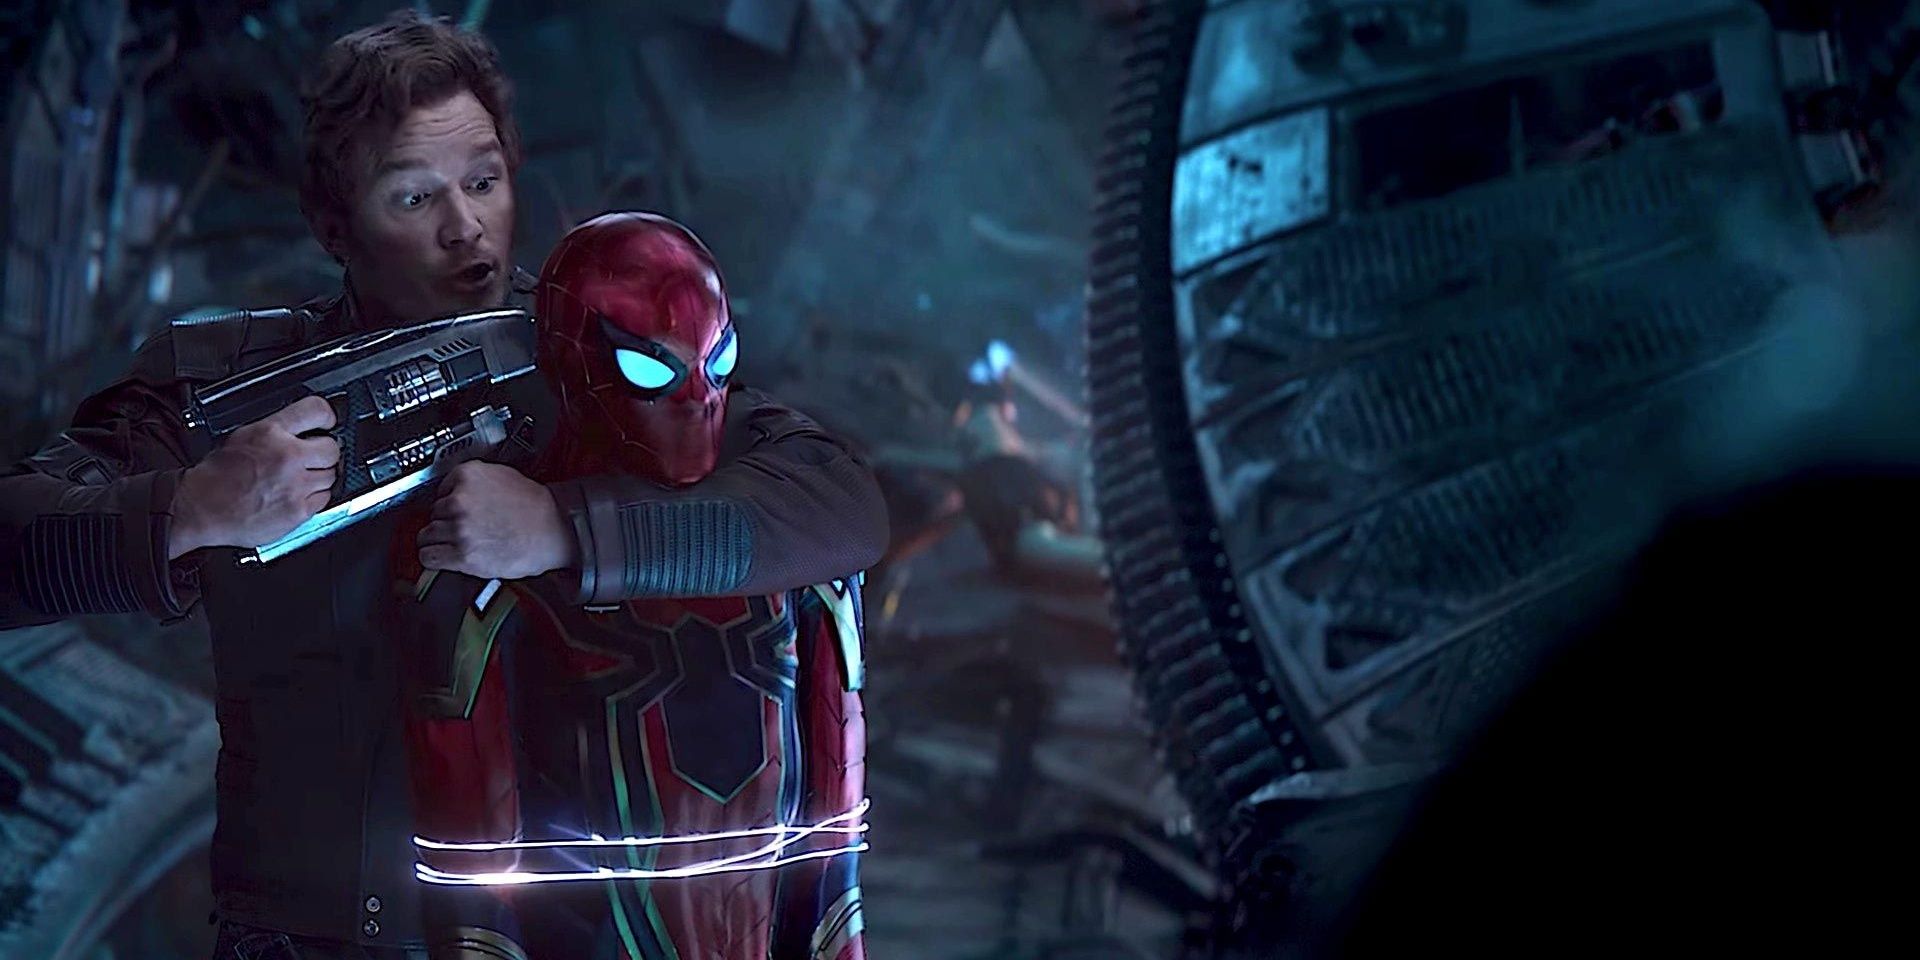 Spider-Man and Star-Lord in Infinity War